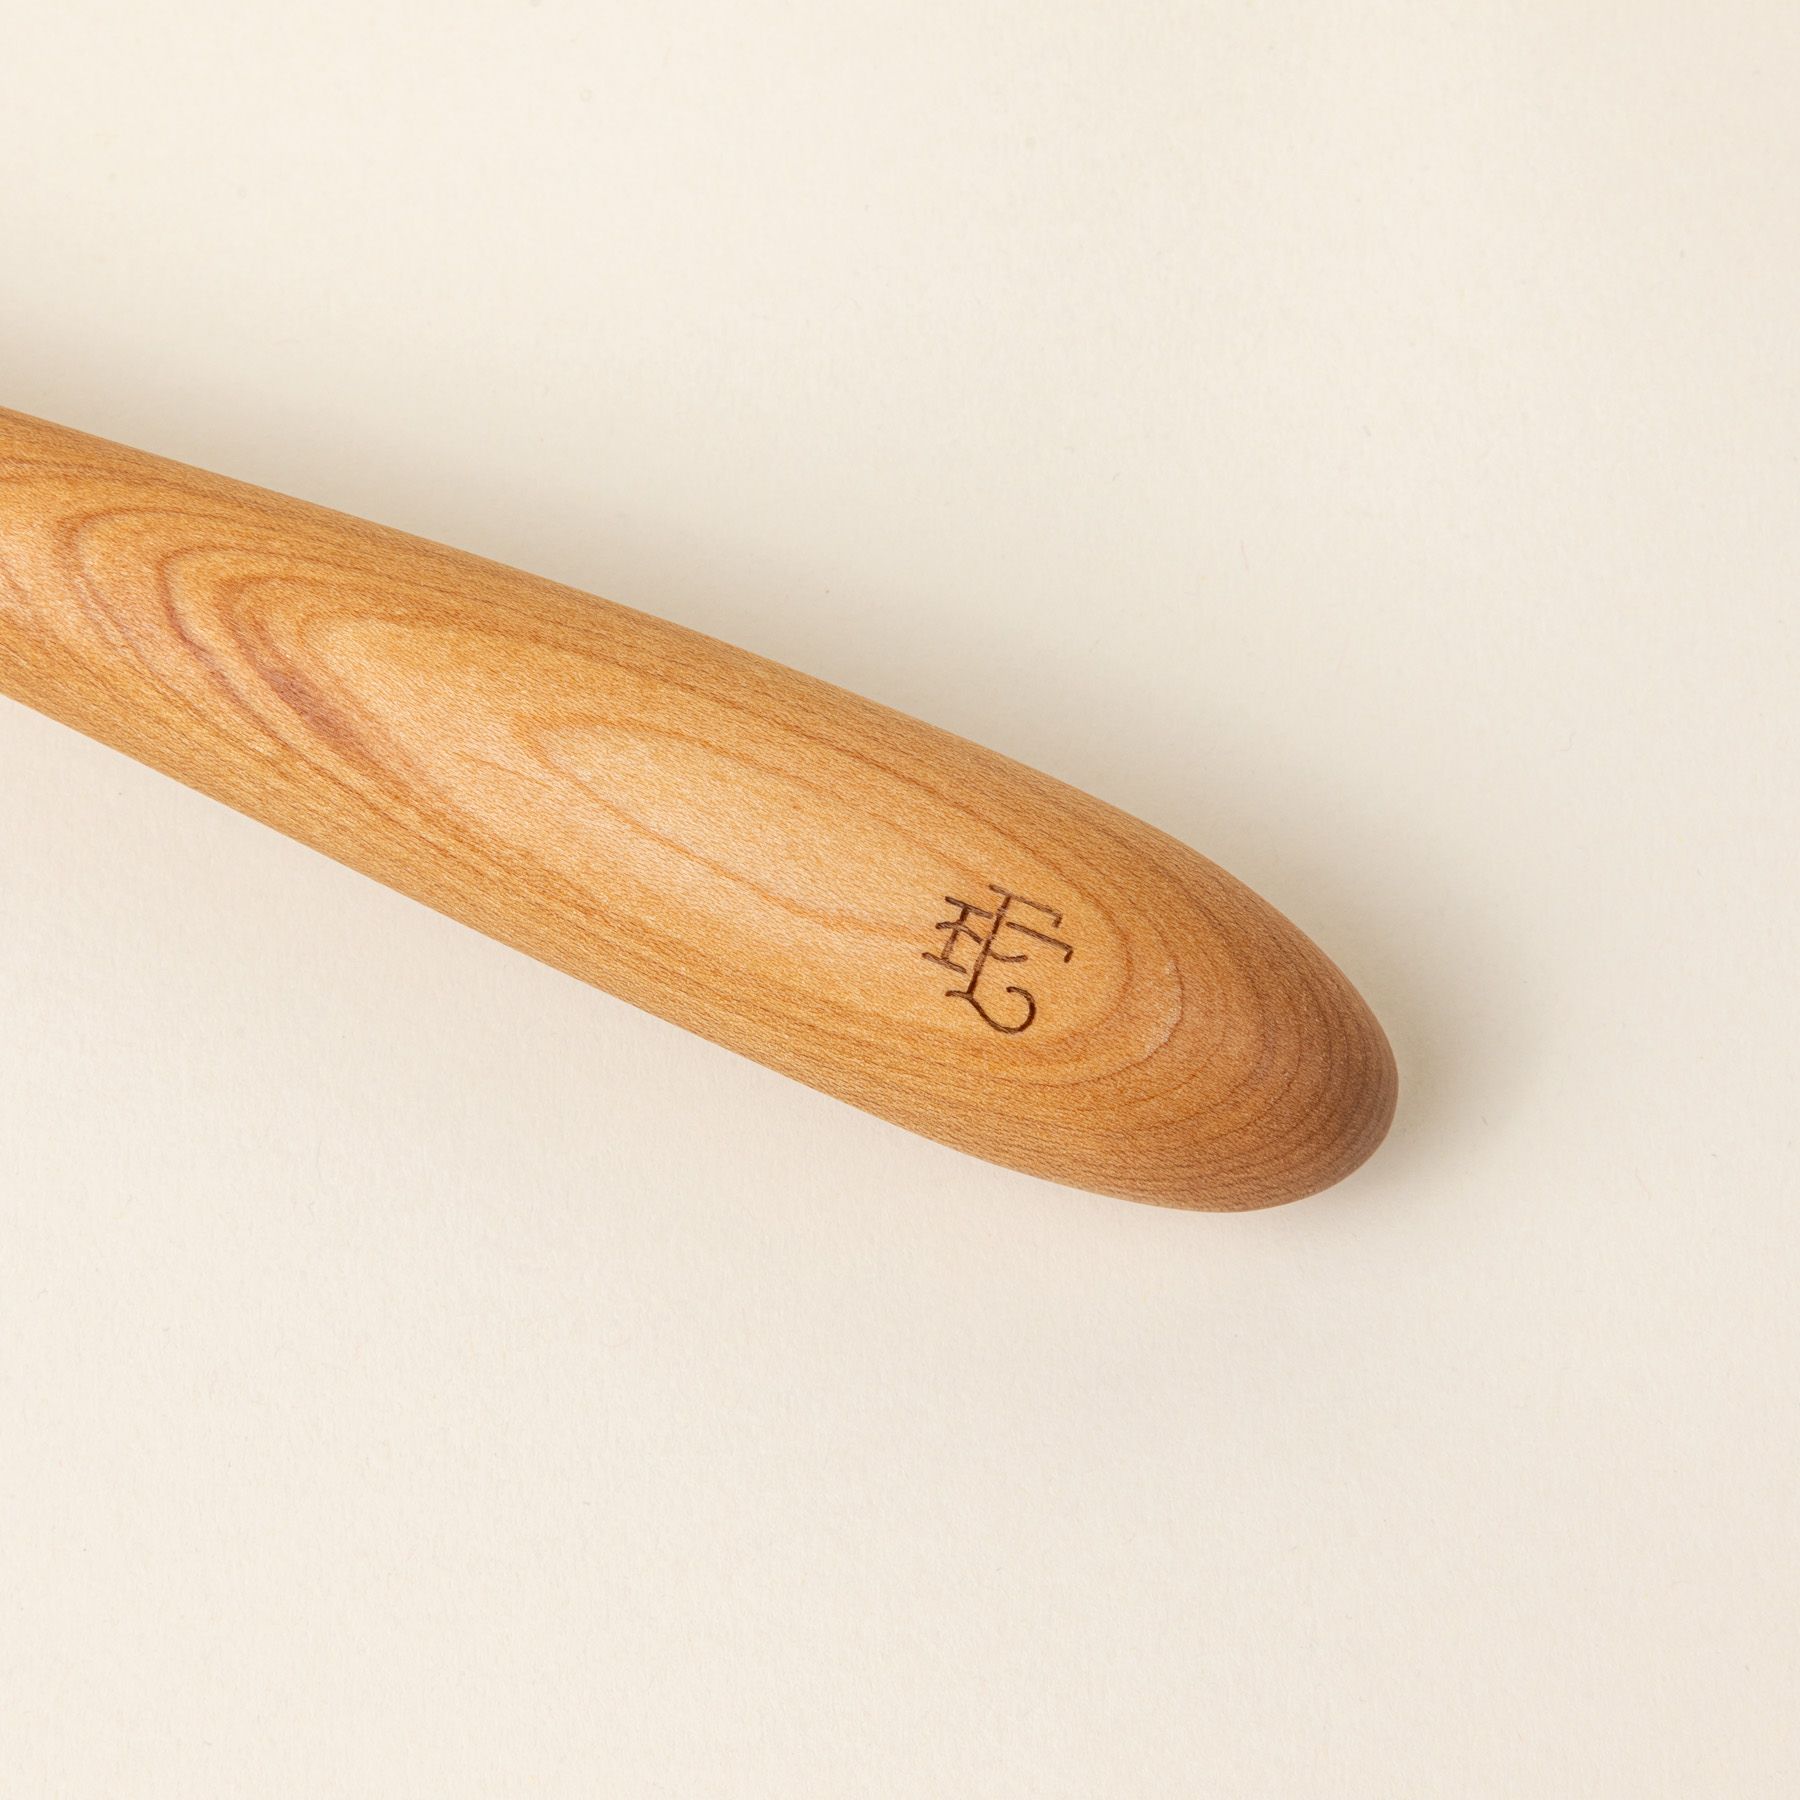 A stamp of the East Fork logo on the end of a wood ladle.